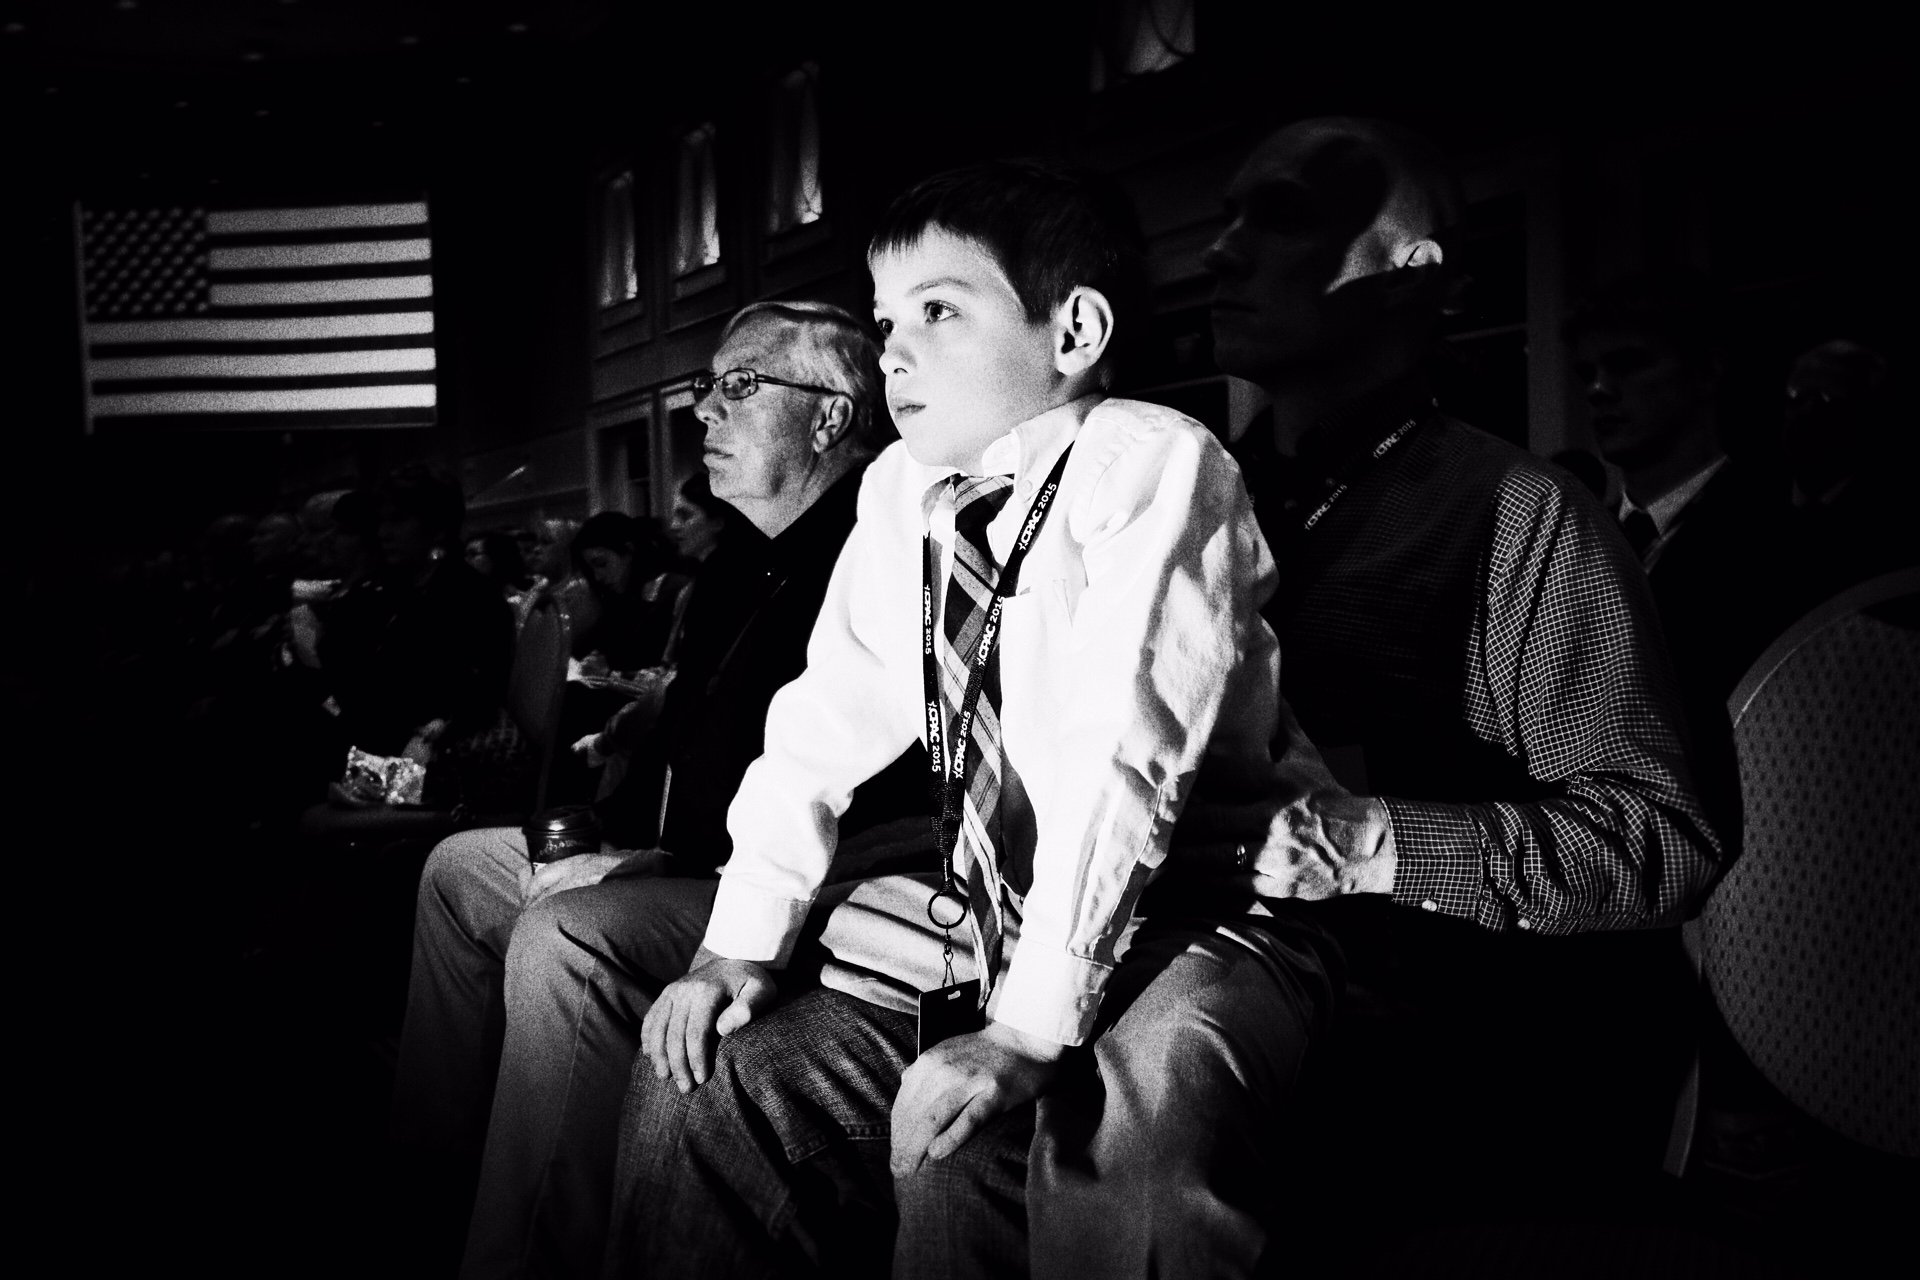 Nine year old Thomas H. from Virginia at his first CPAC in National Harbor, Md. on Feb. 27, 2015.